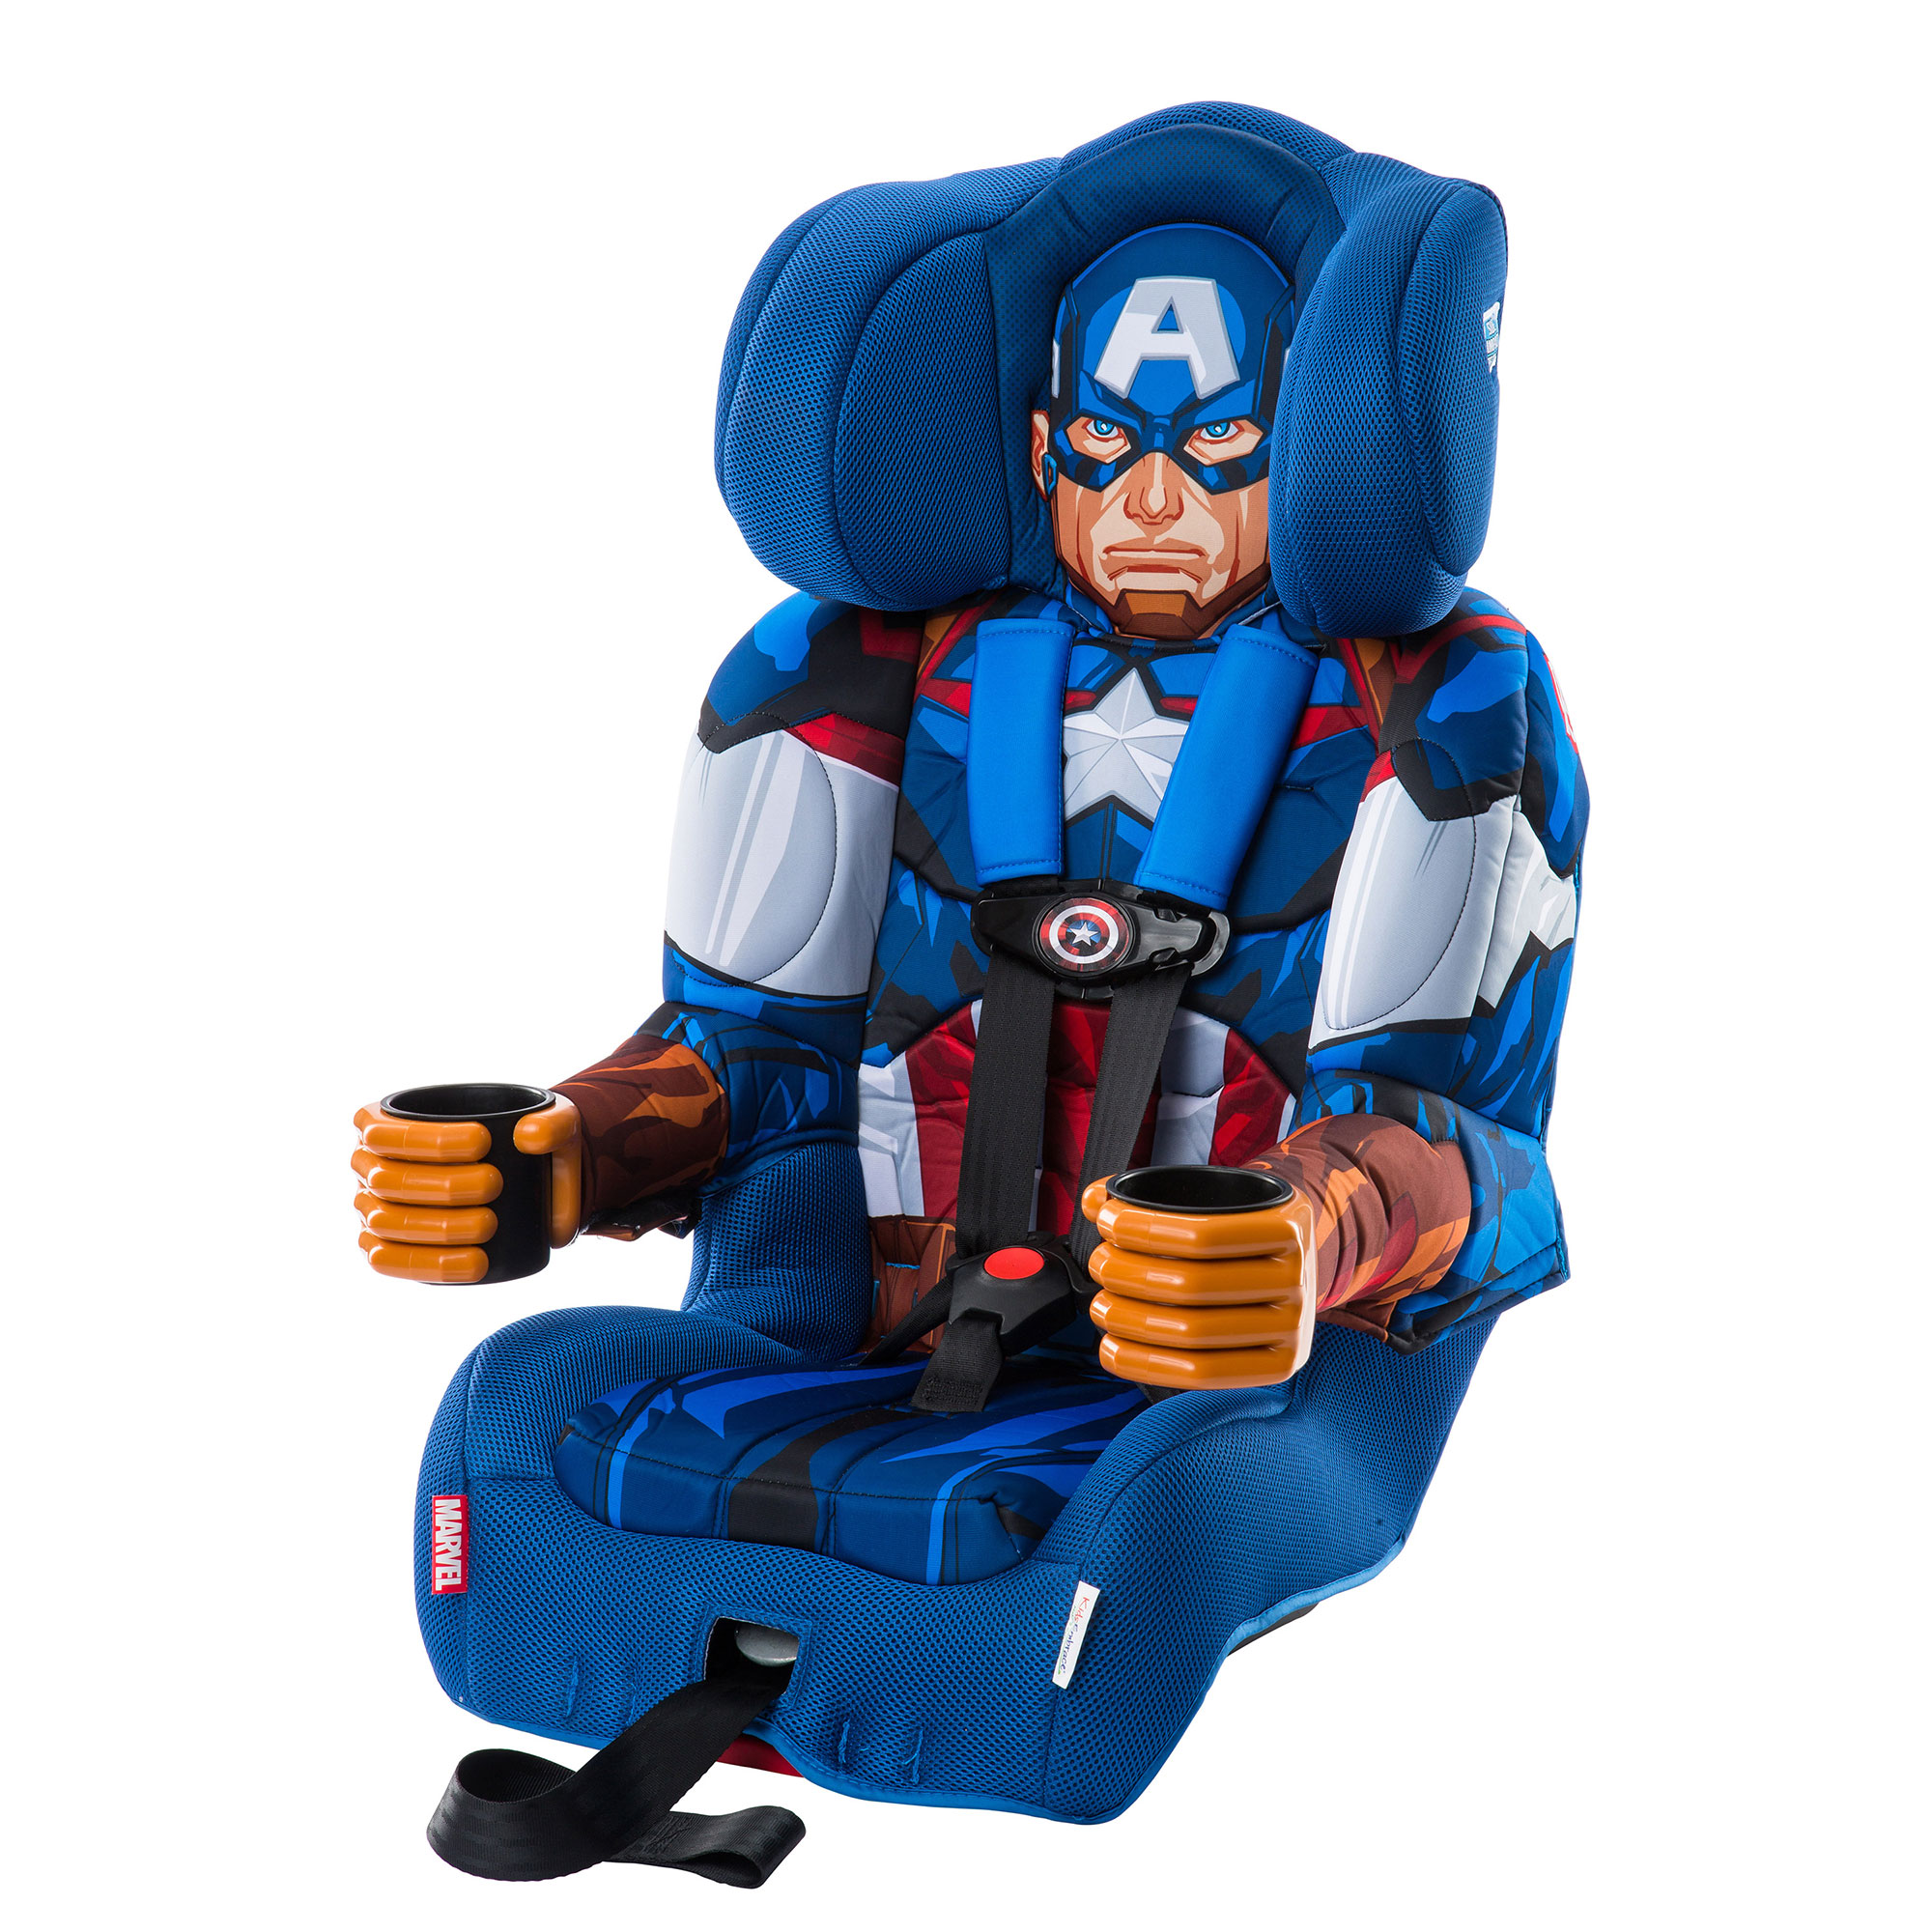 KidsEmbrace Combination Harness Booster Car Seat, Marvel Avengers Captain America - image 2 of 6